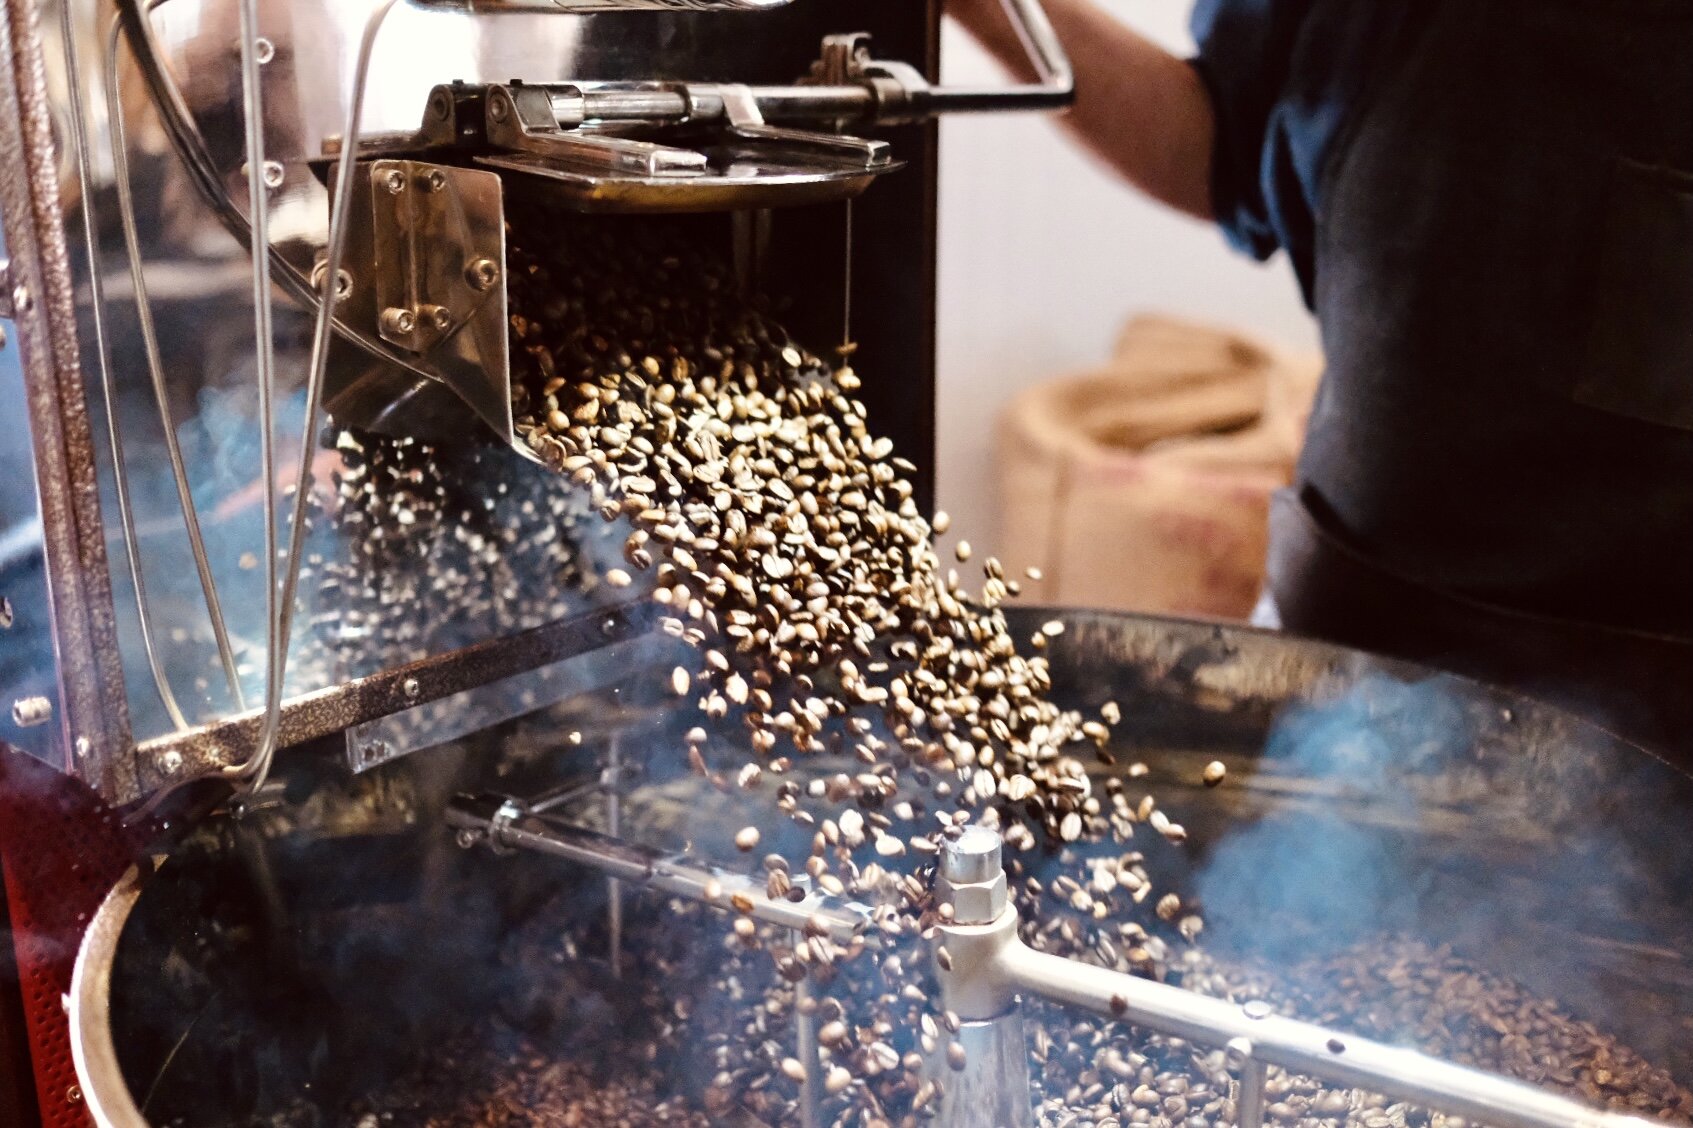 The Forthcoming xBloom Automates Single-Serve Brews Based on Roasters'  SpecificationsDaily Coffee News by Roast Magazine